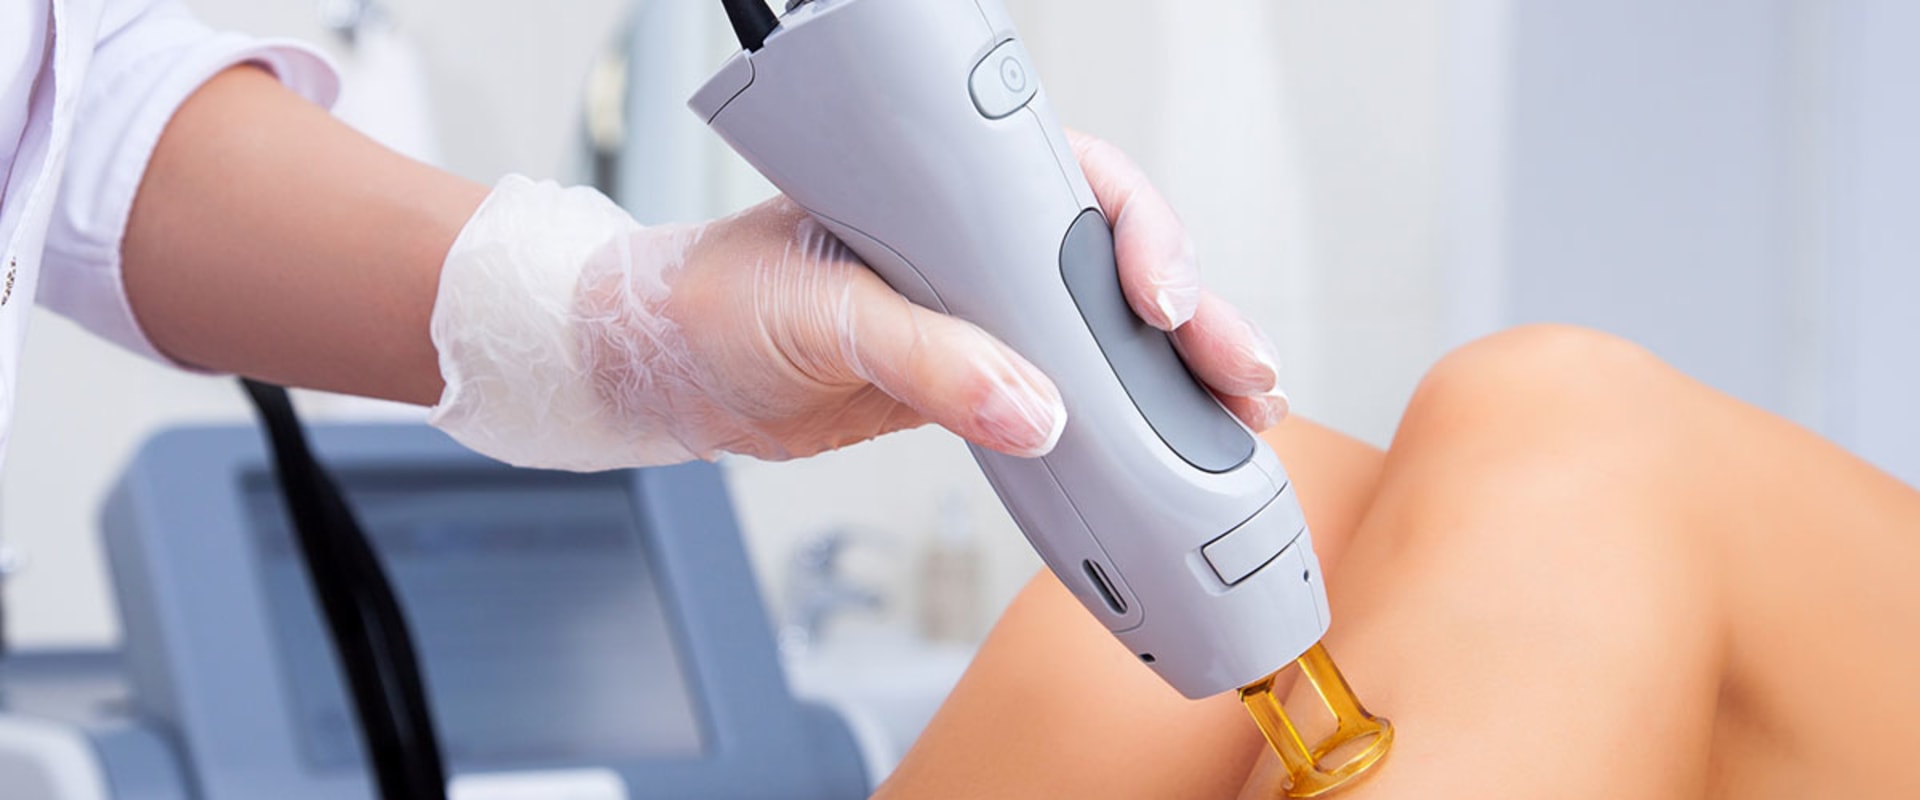 Payment Plans and Financing for Laser Hair Removal